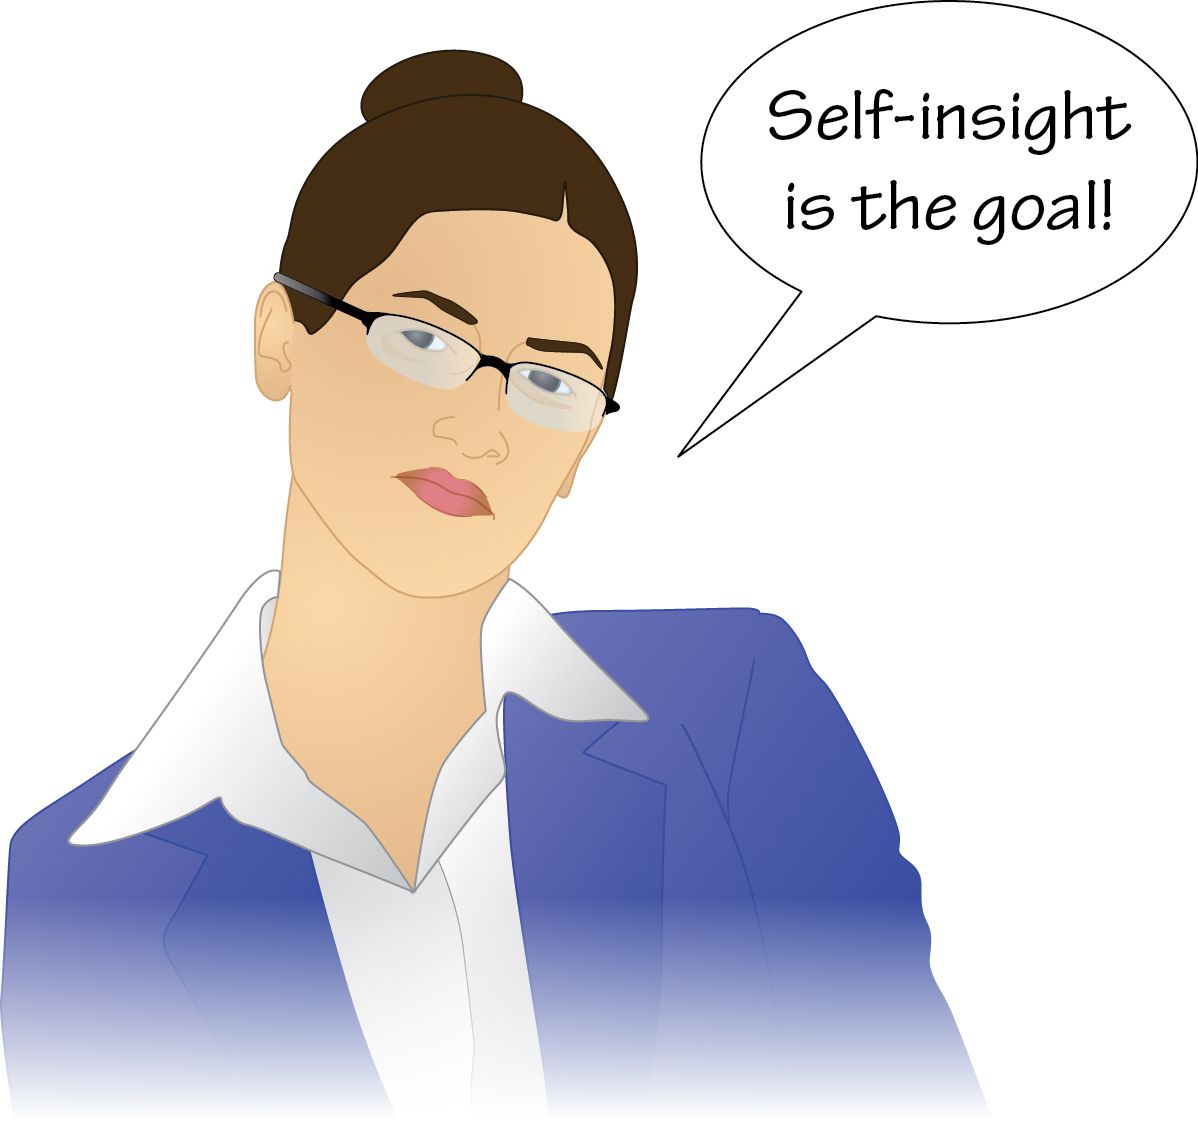 speech bubble attached to the analyst that shows text within it: “Self-insight is the goal!”